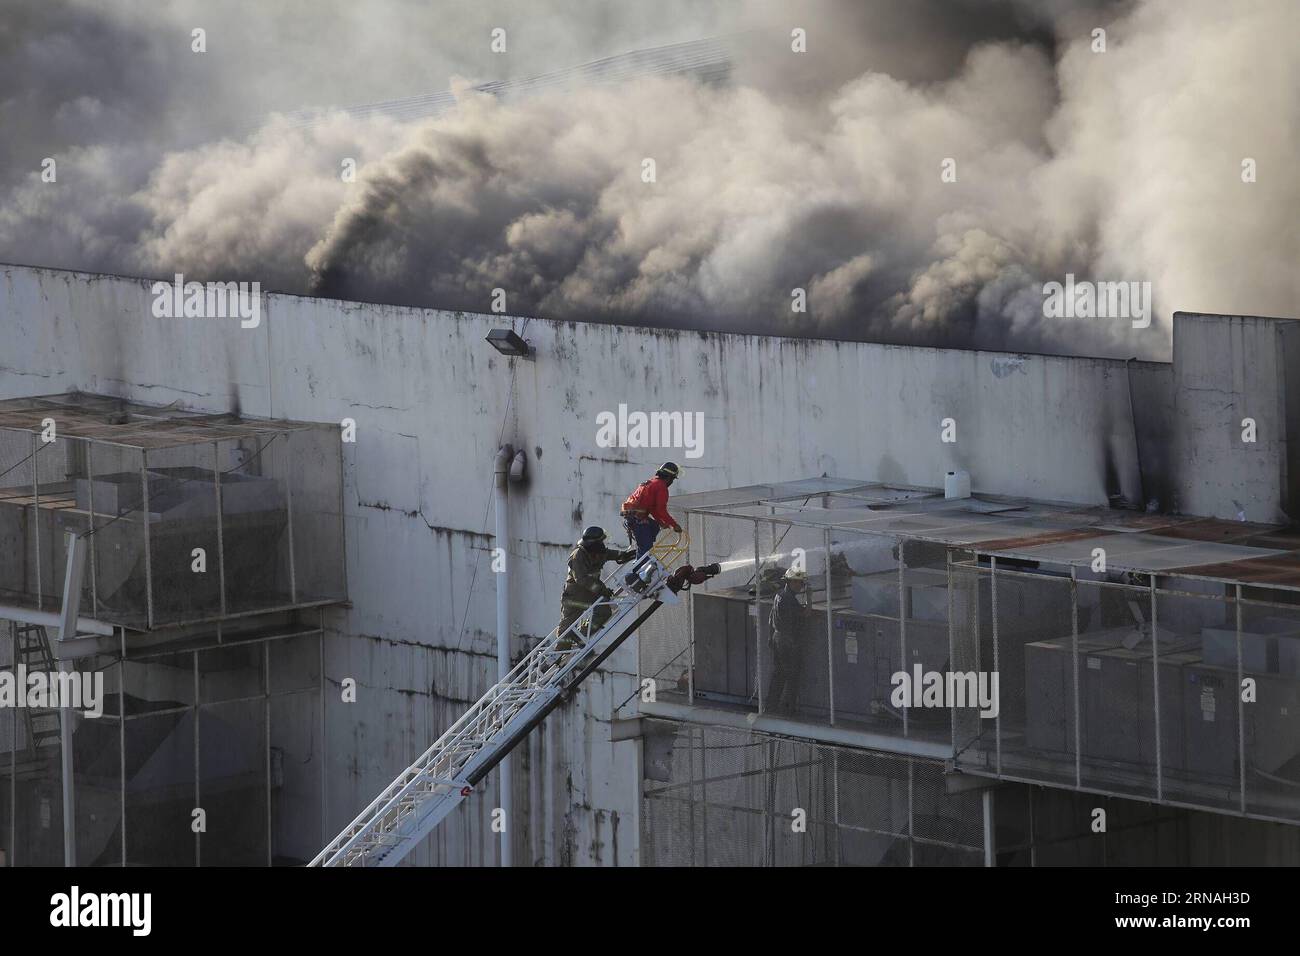 (160126) -- PANAMA CITY, Jan. 26, 2016. -- Panama Fire Department members try to extinguish the fire in El Fuerte supermarket in San Miguelito, in Panama City, capital of Panama, Jan. 26, 2016. National Director of the Panama Fire Department Jaime Villar said that the fire started about 4:30 early Tuesday. ) PANAMA-PANAMA CITY-ACCIDENT-FIRE MauricioxValenzuela PUBLICATIONxNOTxINxCHN   160126 Panama City Jan 26 2016 Panama Fire Department Members Try to extinguisher The Fire in El Fuerte Supermarket in San Miguelito in Panama City Capital of Panama Jan 26 2016 National Director of The Panama Fi Stock Photo